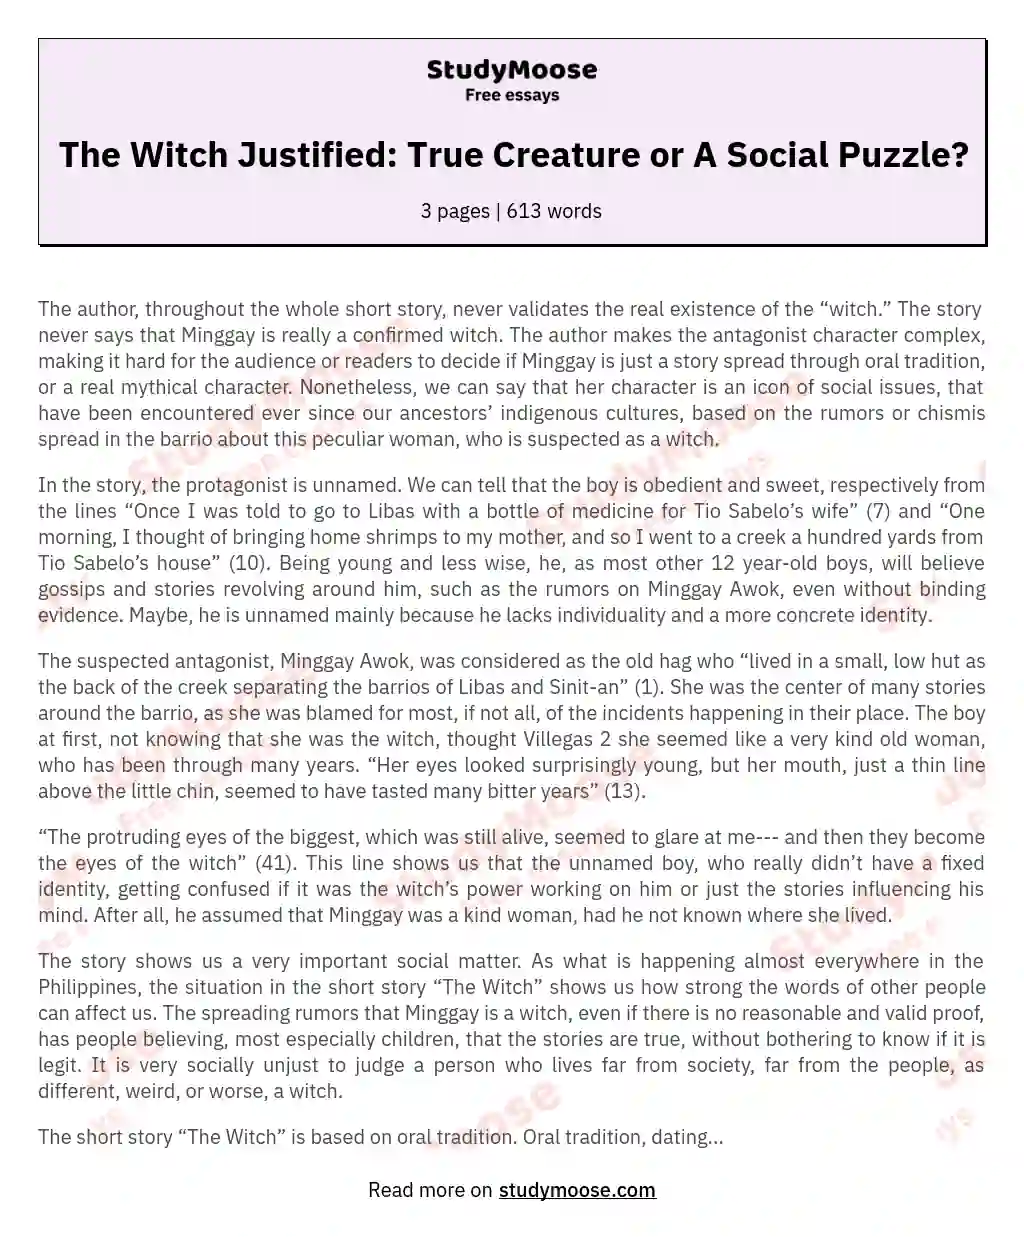 The Witch Justified: True Creature or A Social Puzzle? essay